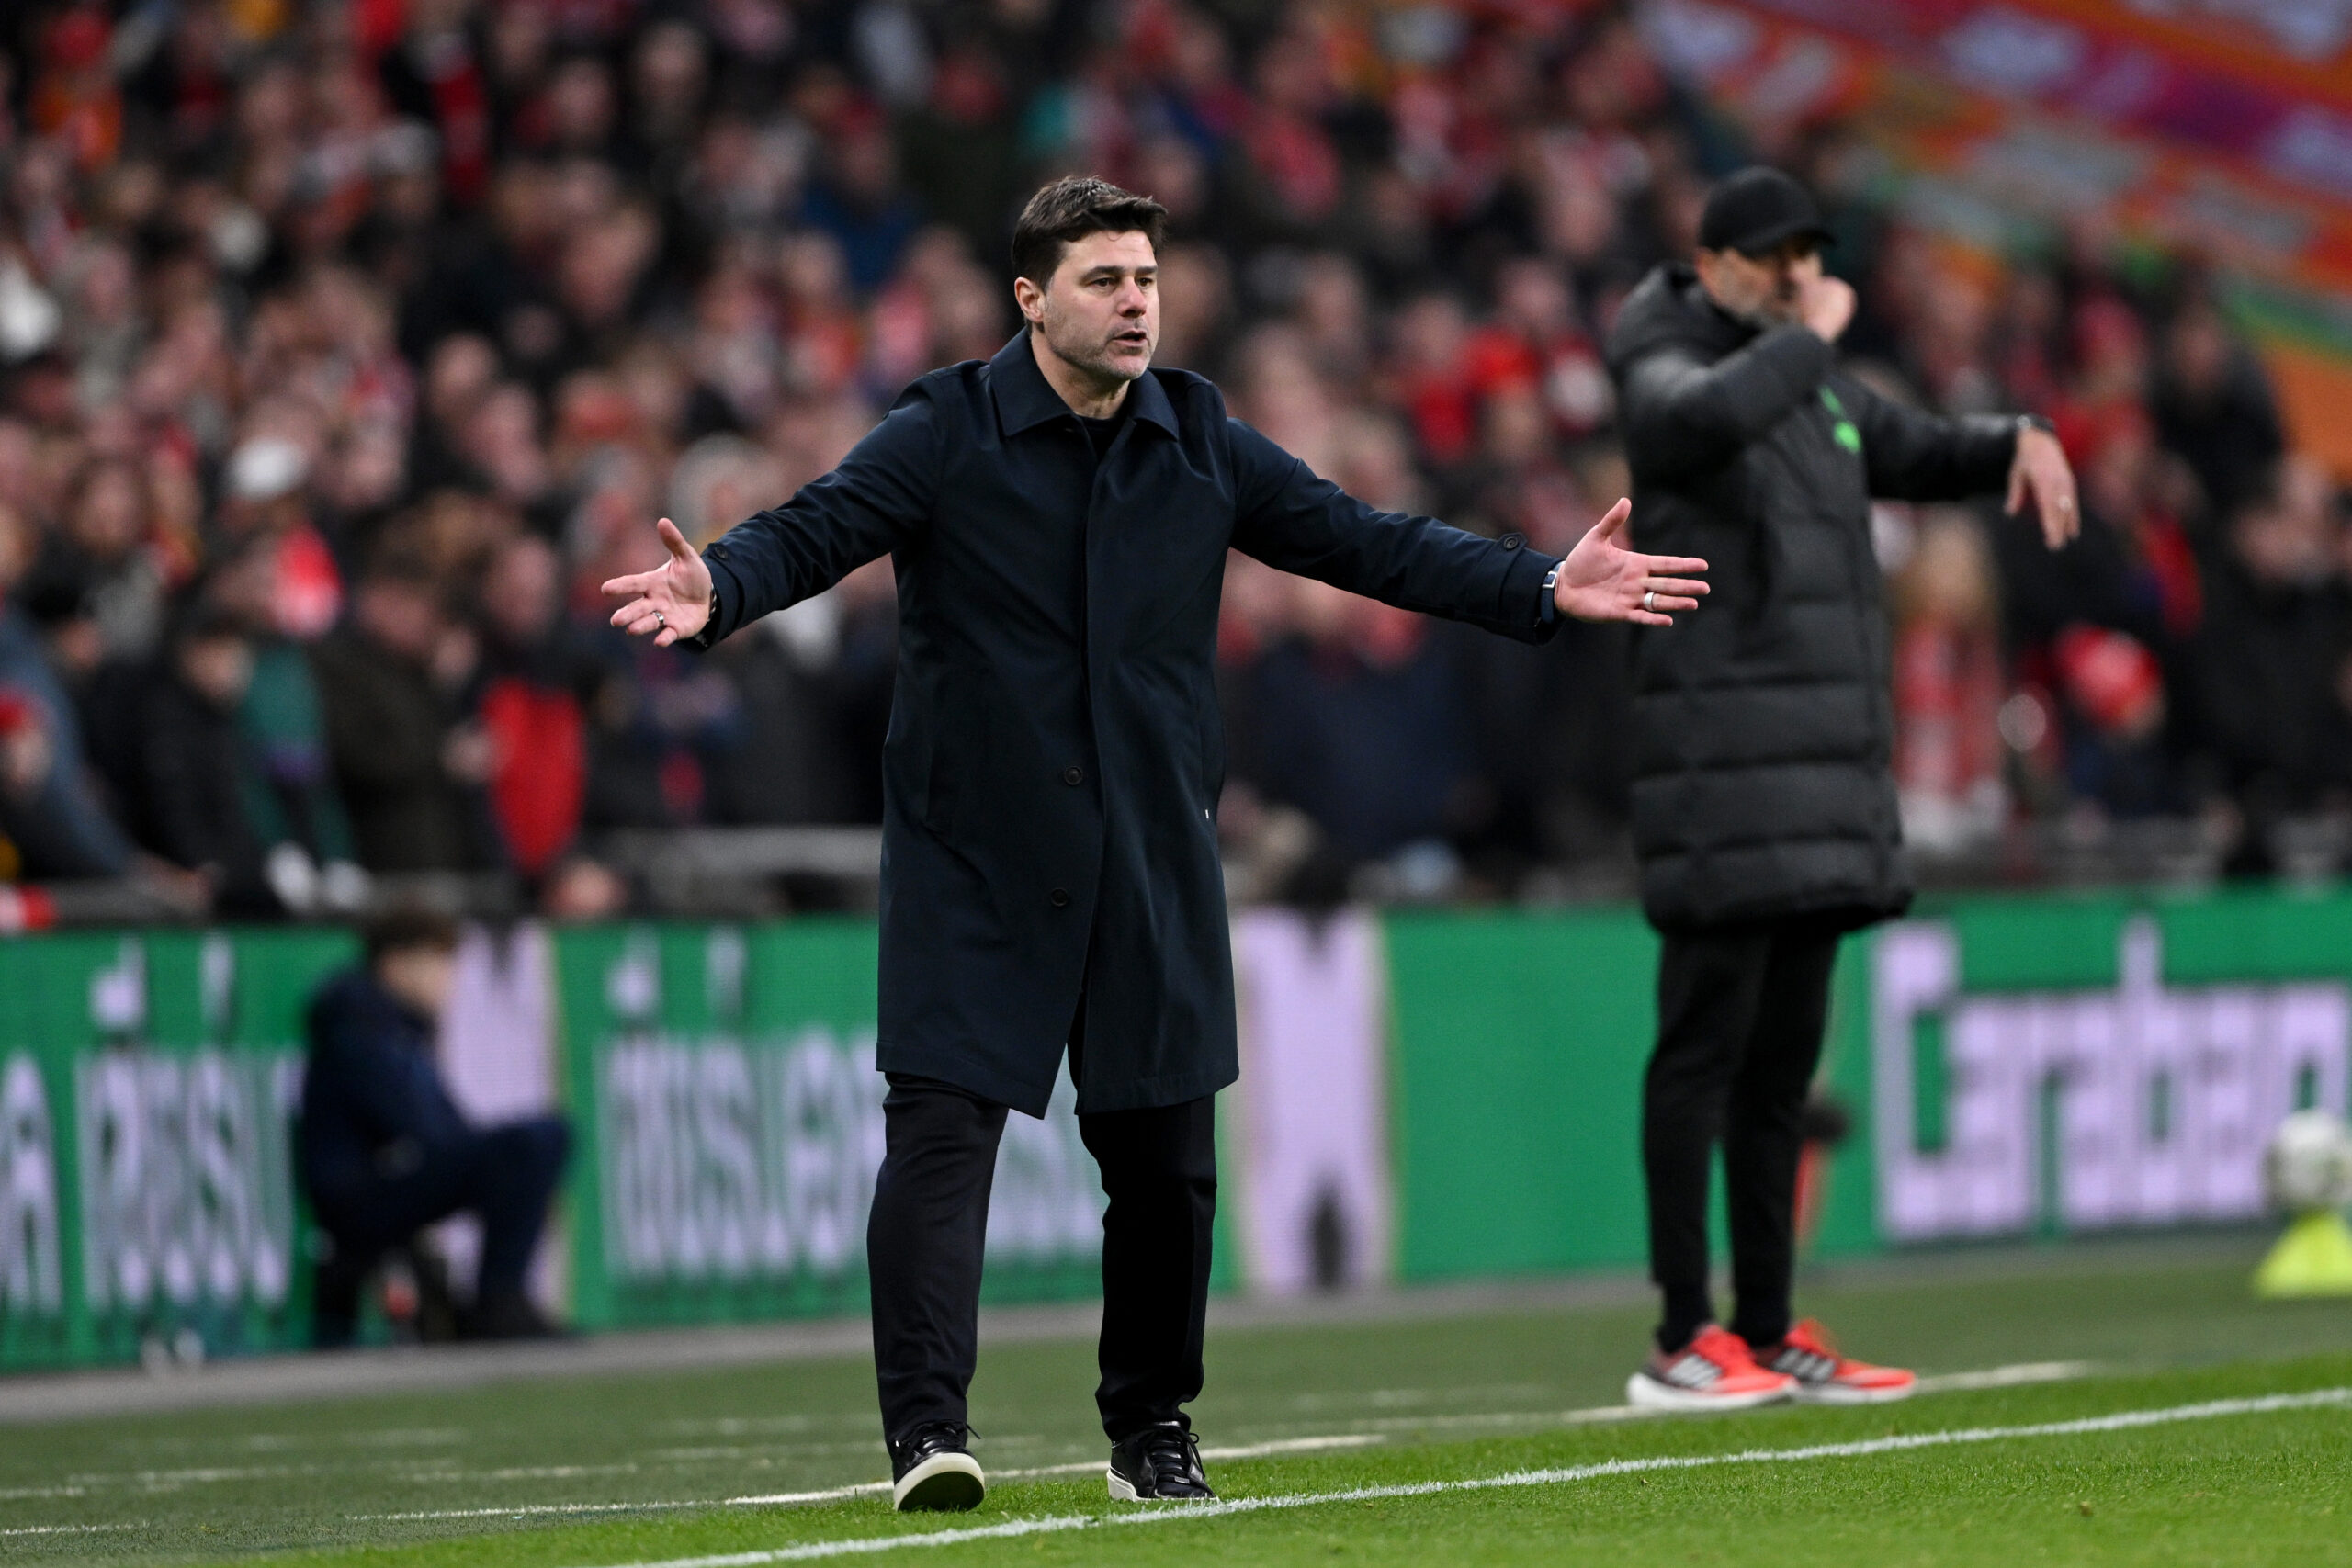 Mauricio Pochettino says if Chelsea performance doesn't change, then they don't deserve European competition